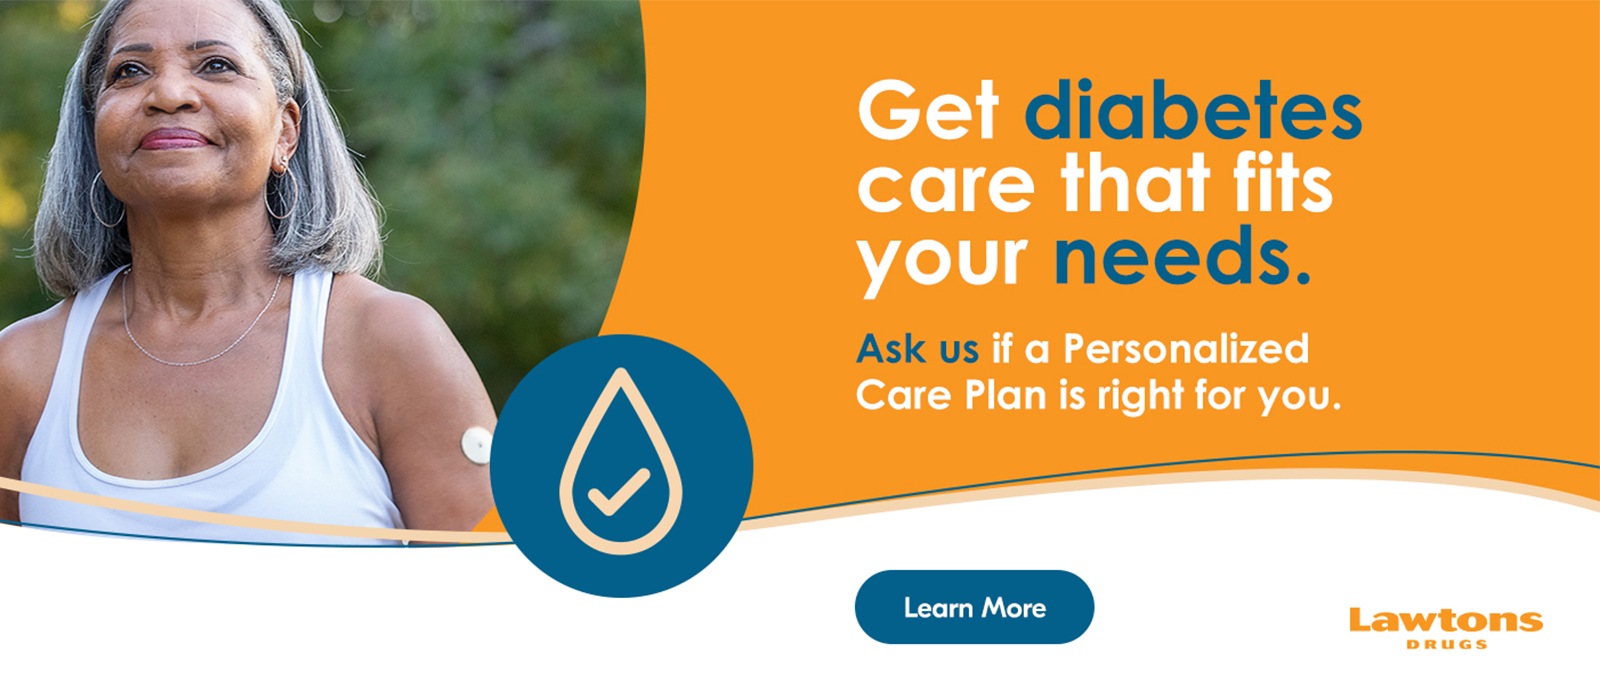 Text Reading 'Get diabetes care that fits your needs at Lawtons Drugs. Ask us if a Personalized Care Plan is right for you. 'Learn More' by clicking on the button below.'